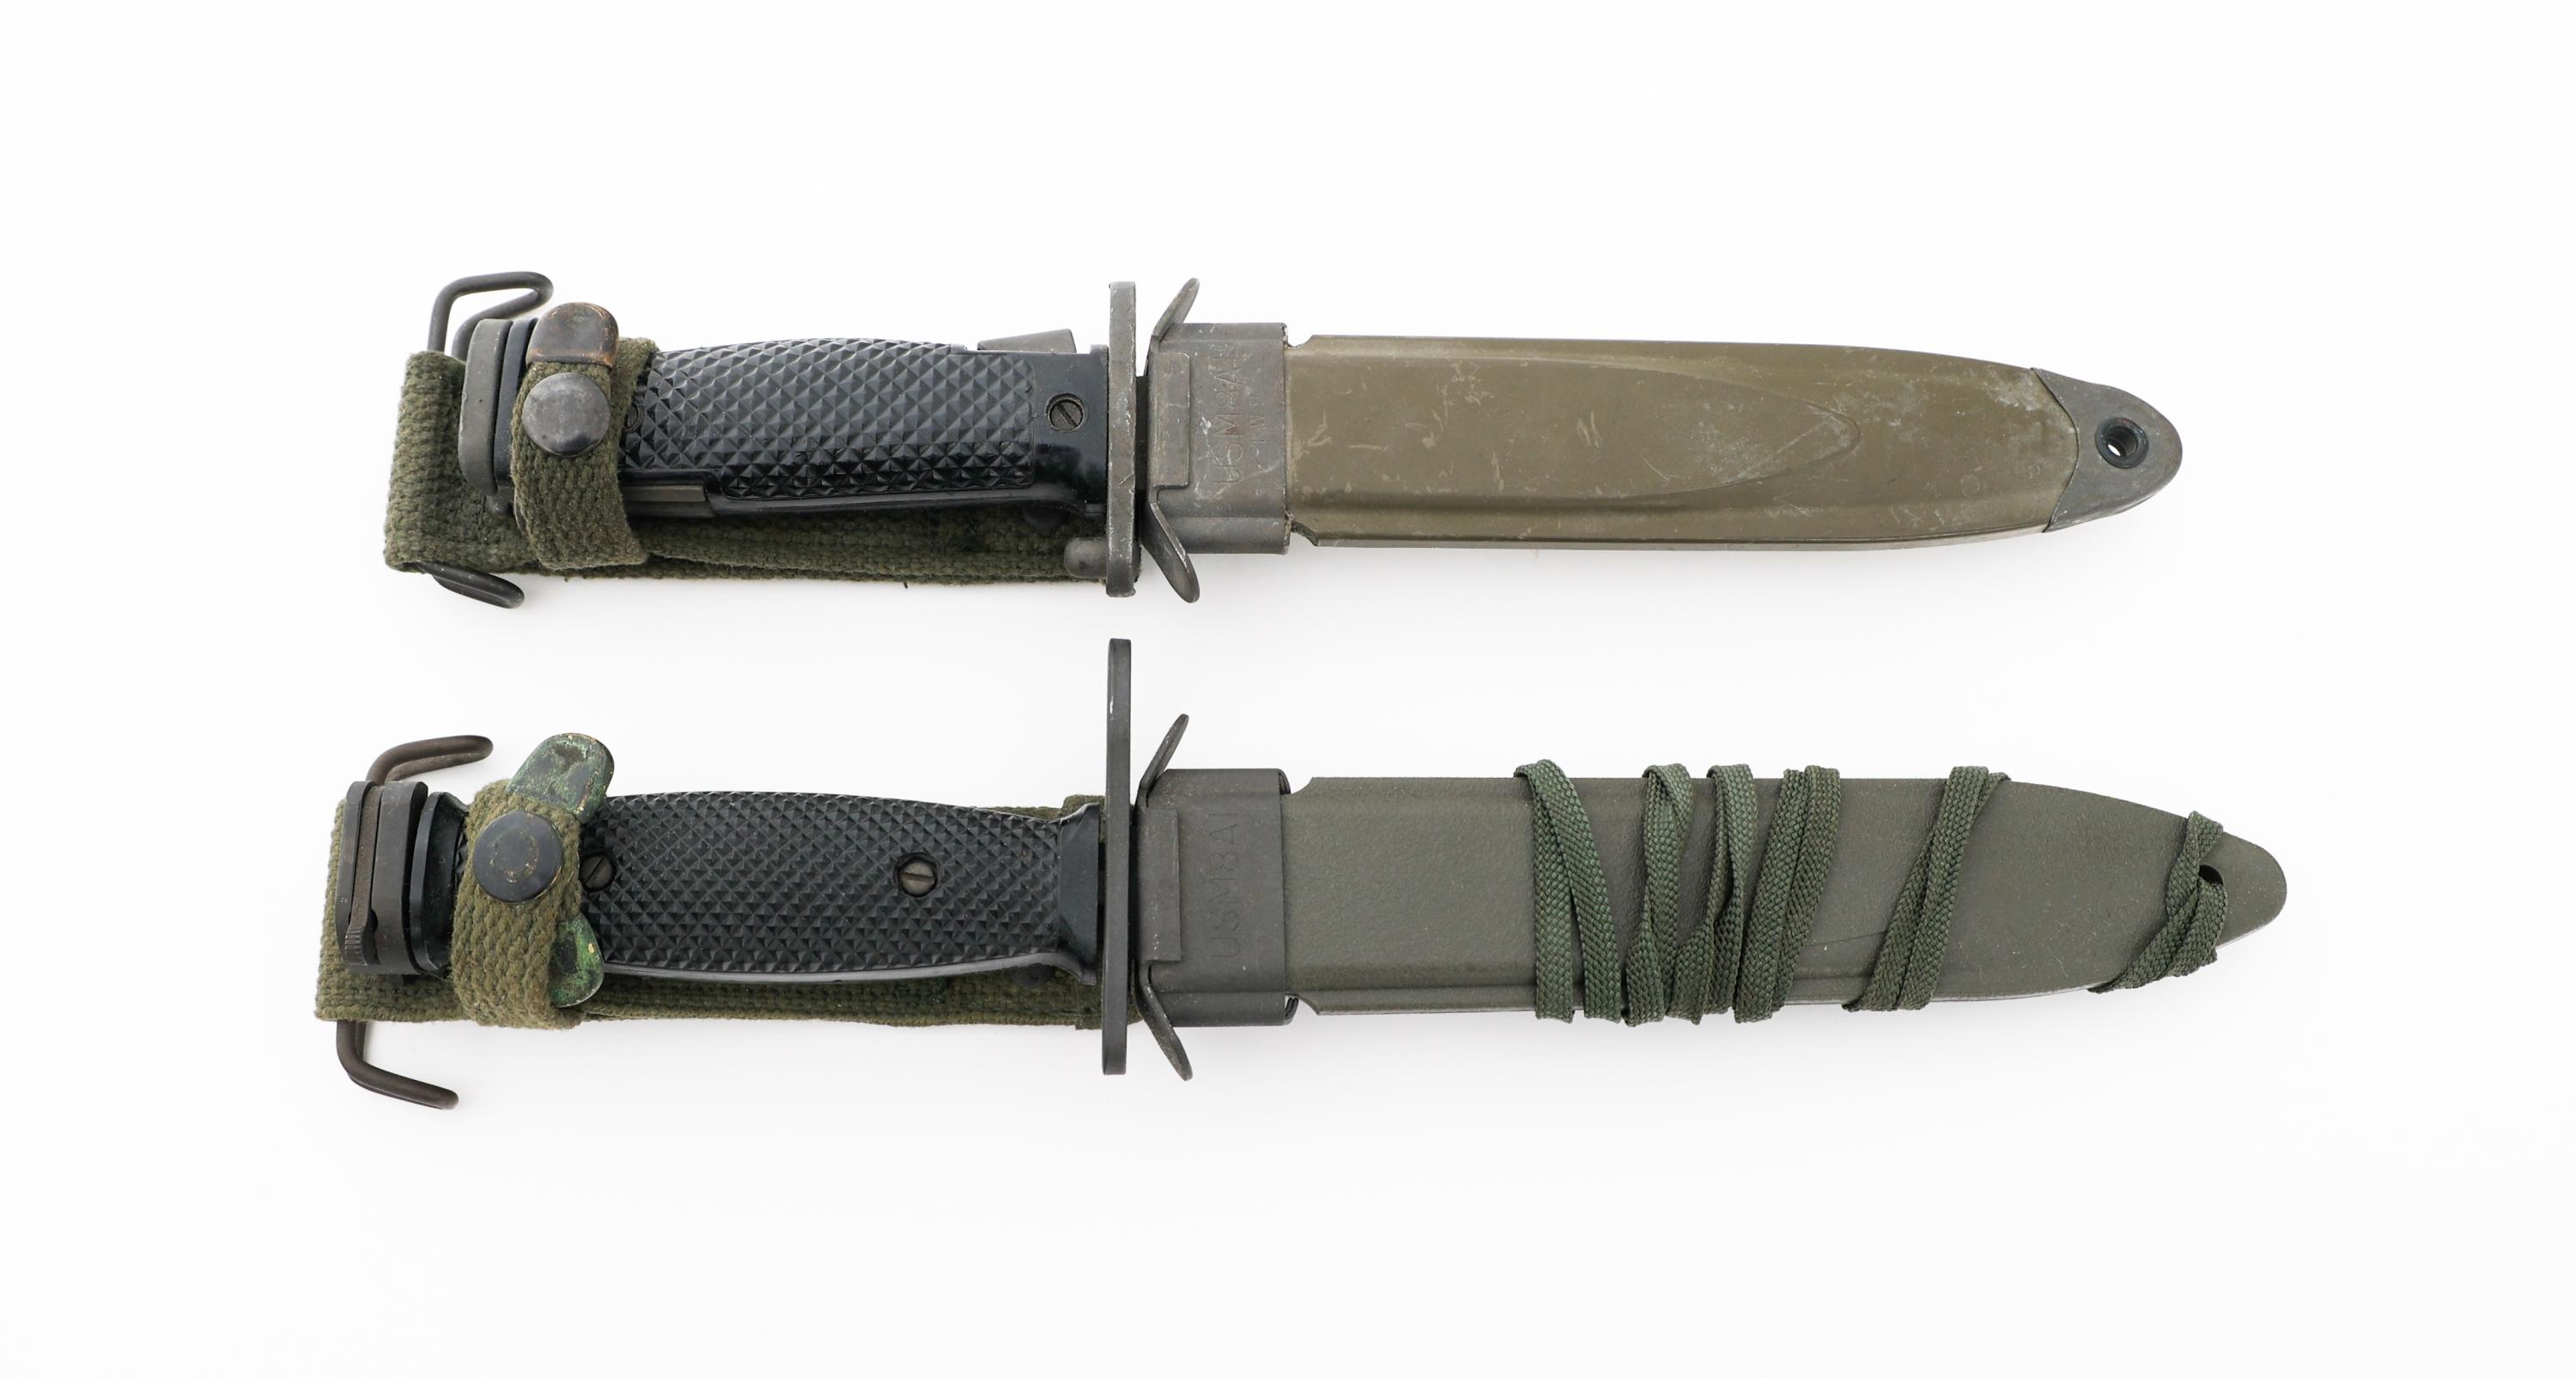 COLD WAR US M5 & M7 BAYONETS by IMPERIAL & COLT